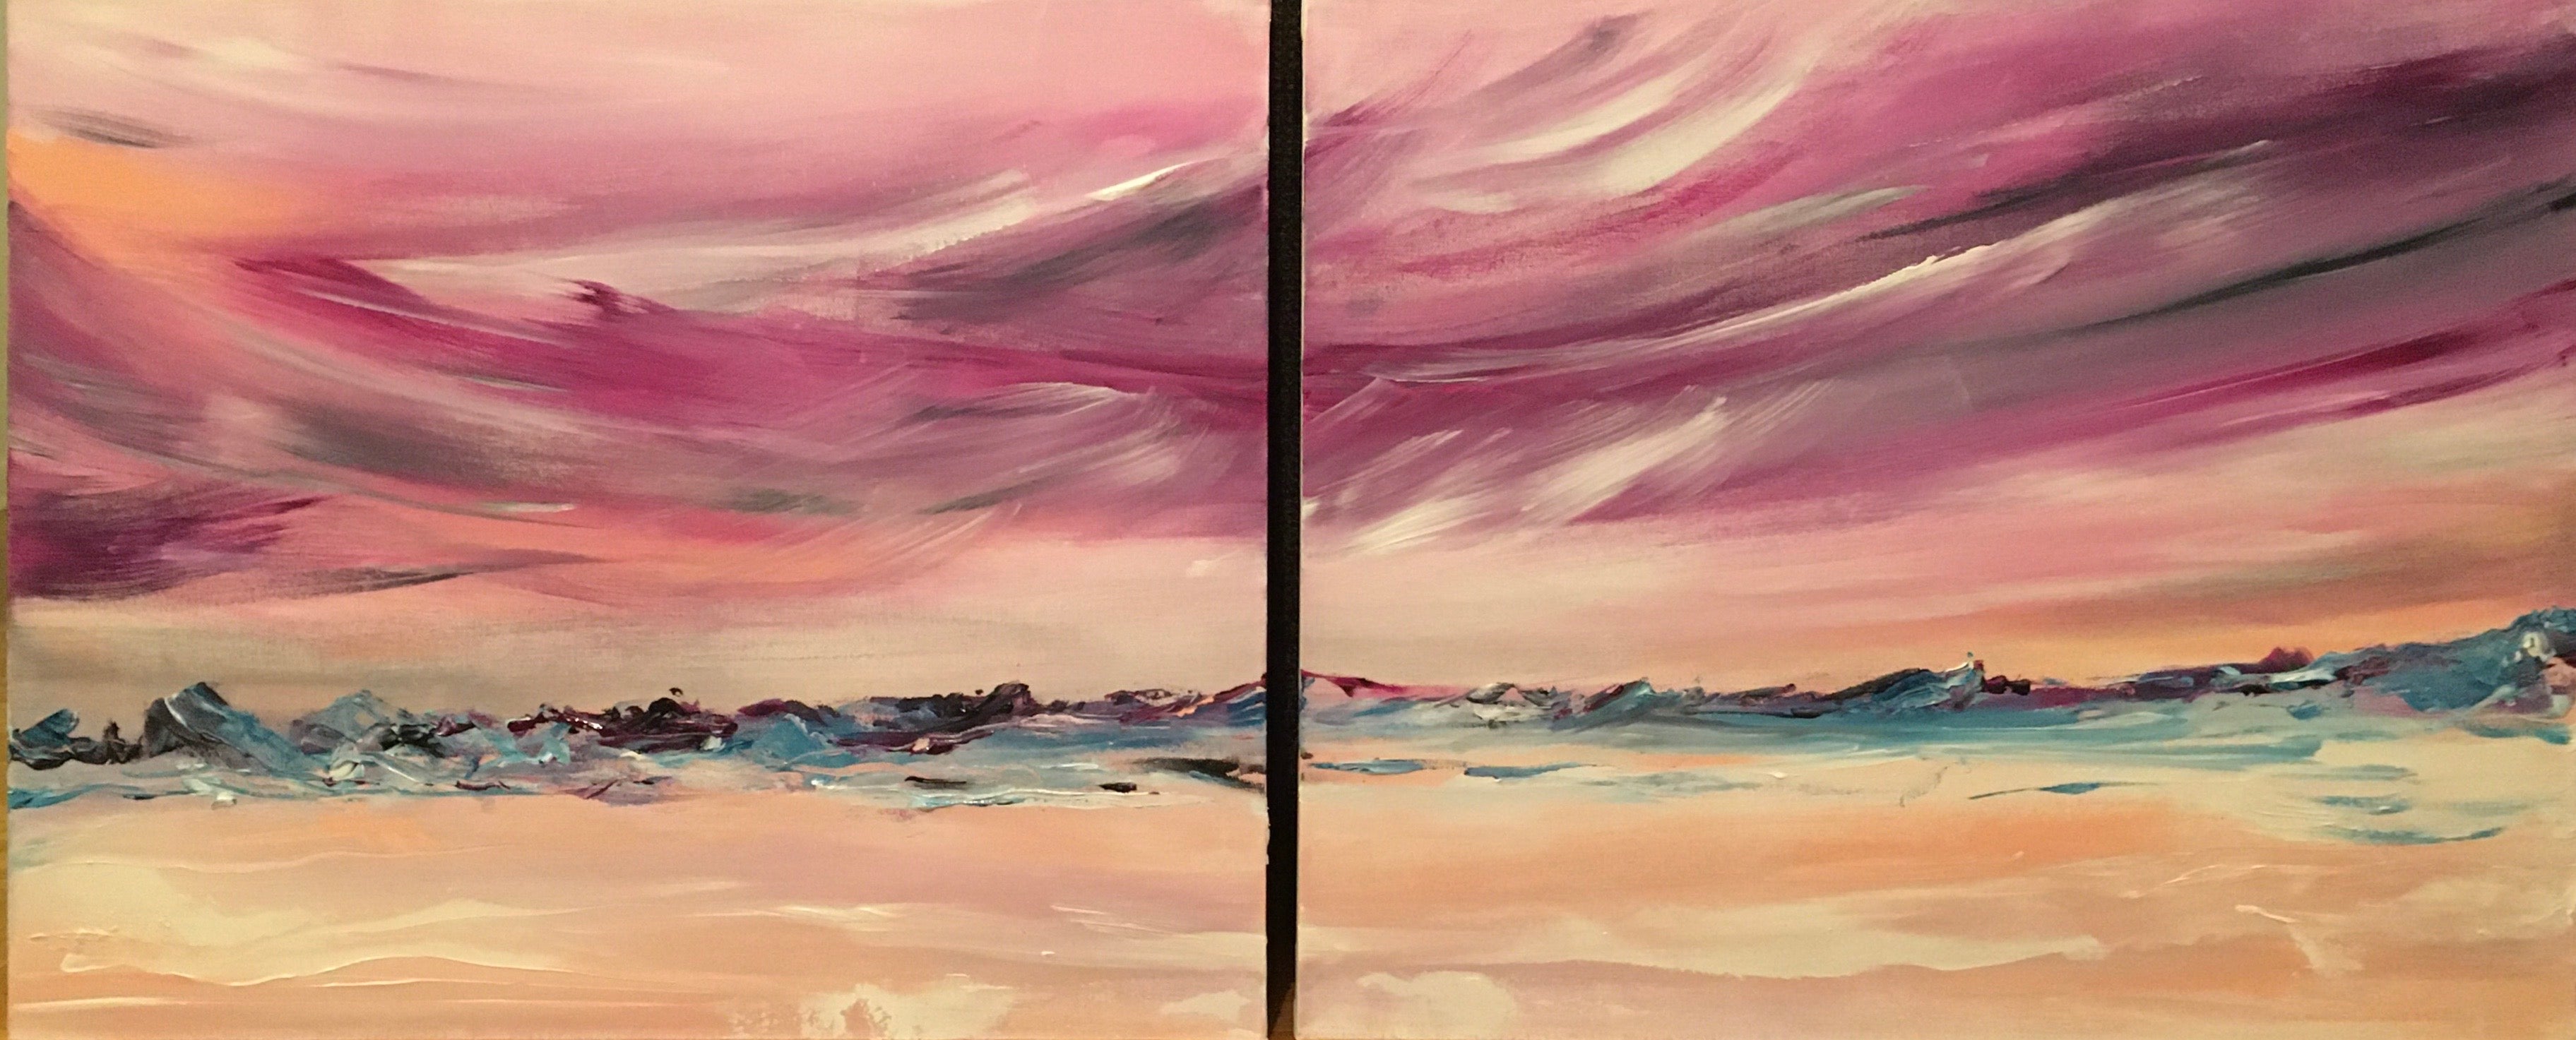 Martian Dream - 48x20" Diptych (2 pieces of 24x20") 